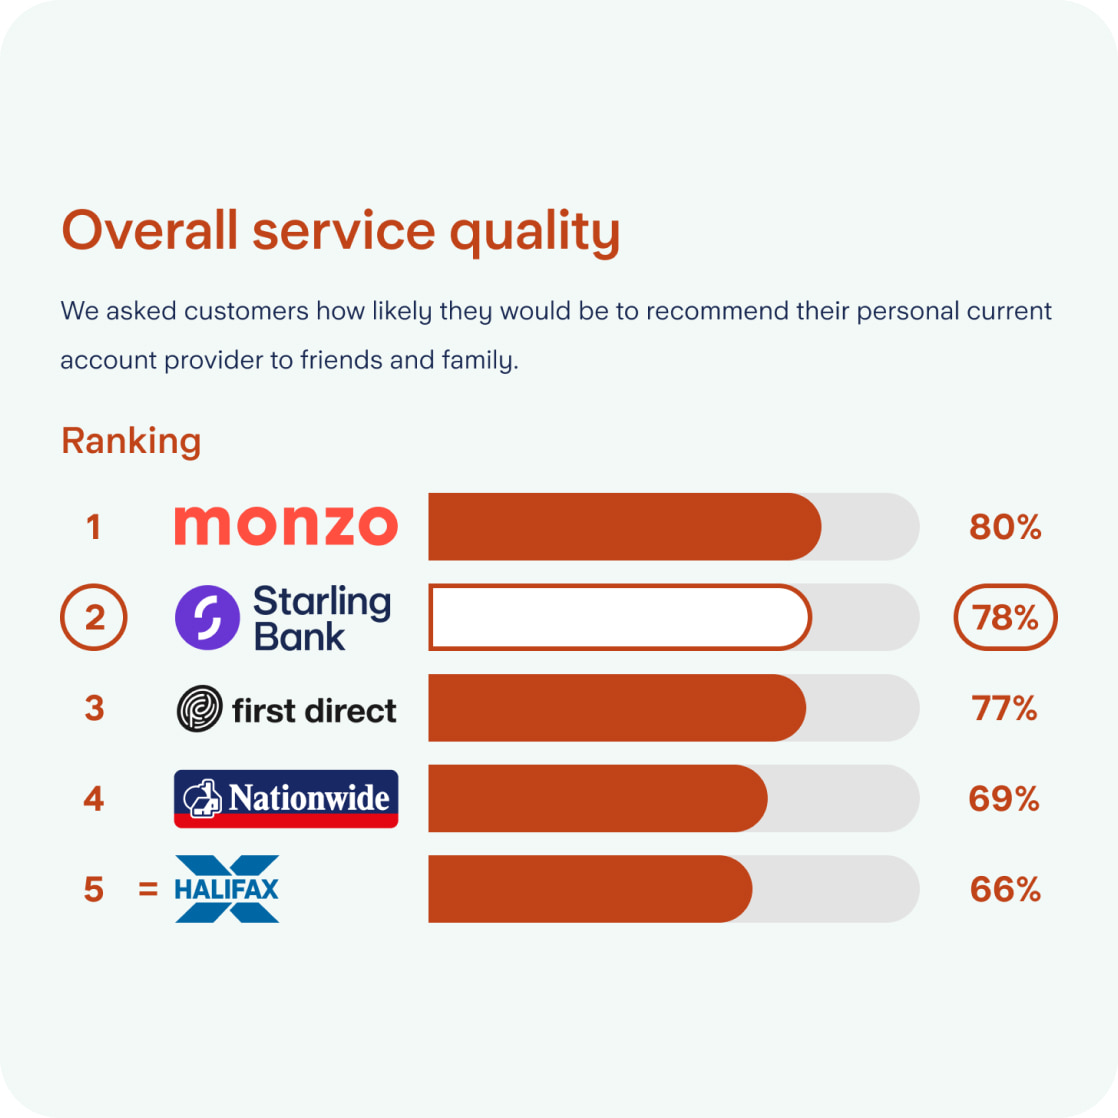 Starling overall service quality survey results: Rank 1, Monzo, 80%. Rank 2, Starling Bank, 78%. Rank 3, First Direct, 77%. Rank 4, Nationwide, 69%. Rank 5, Halifax, 66%.